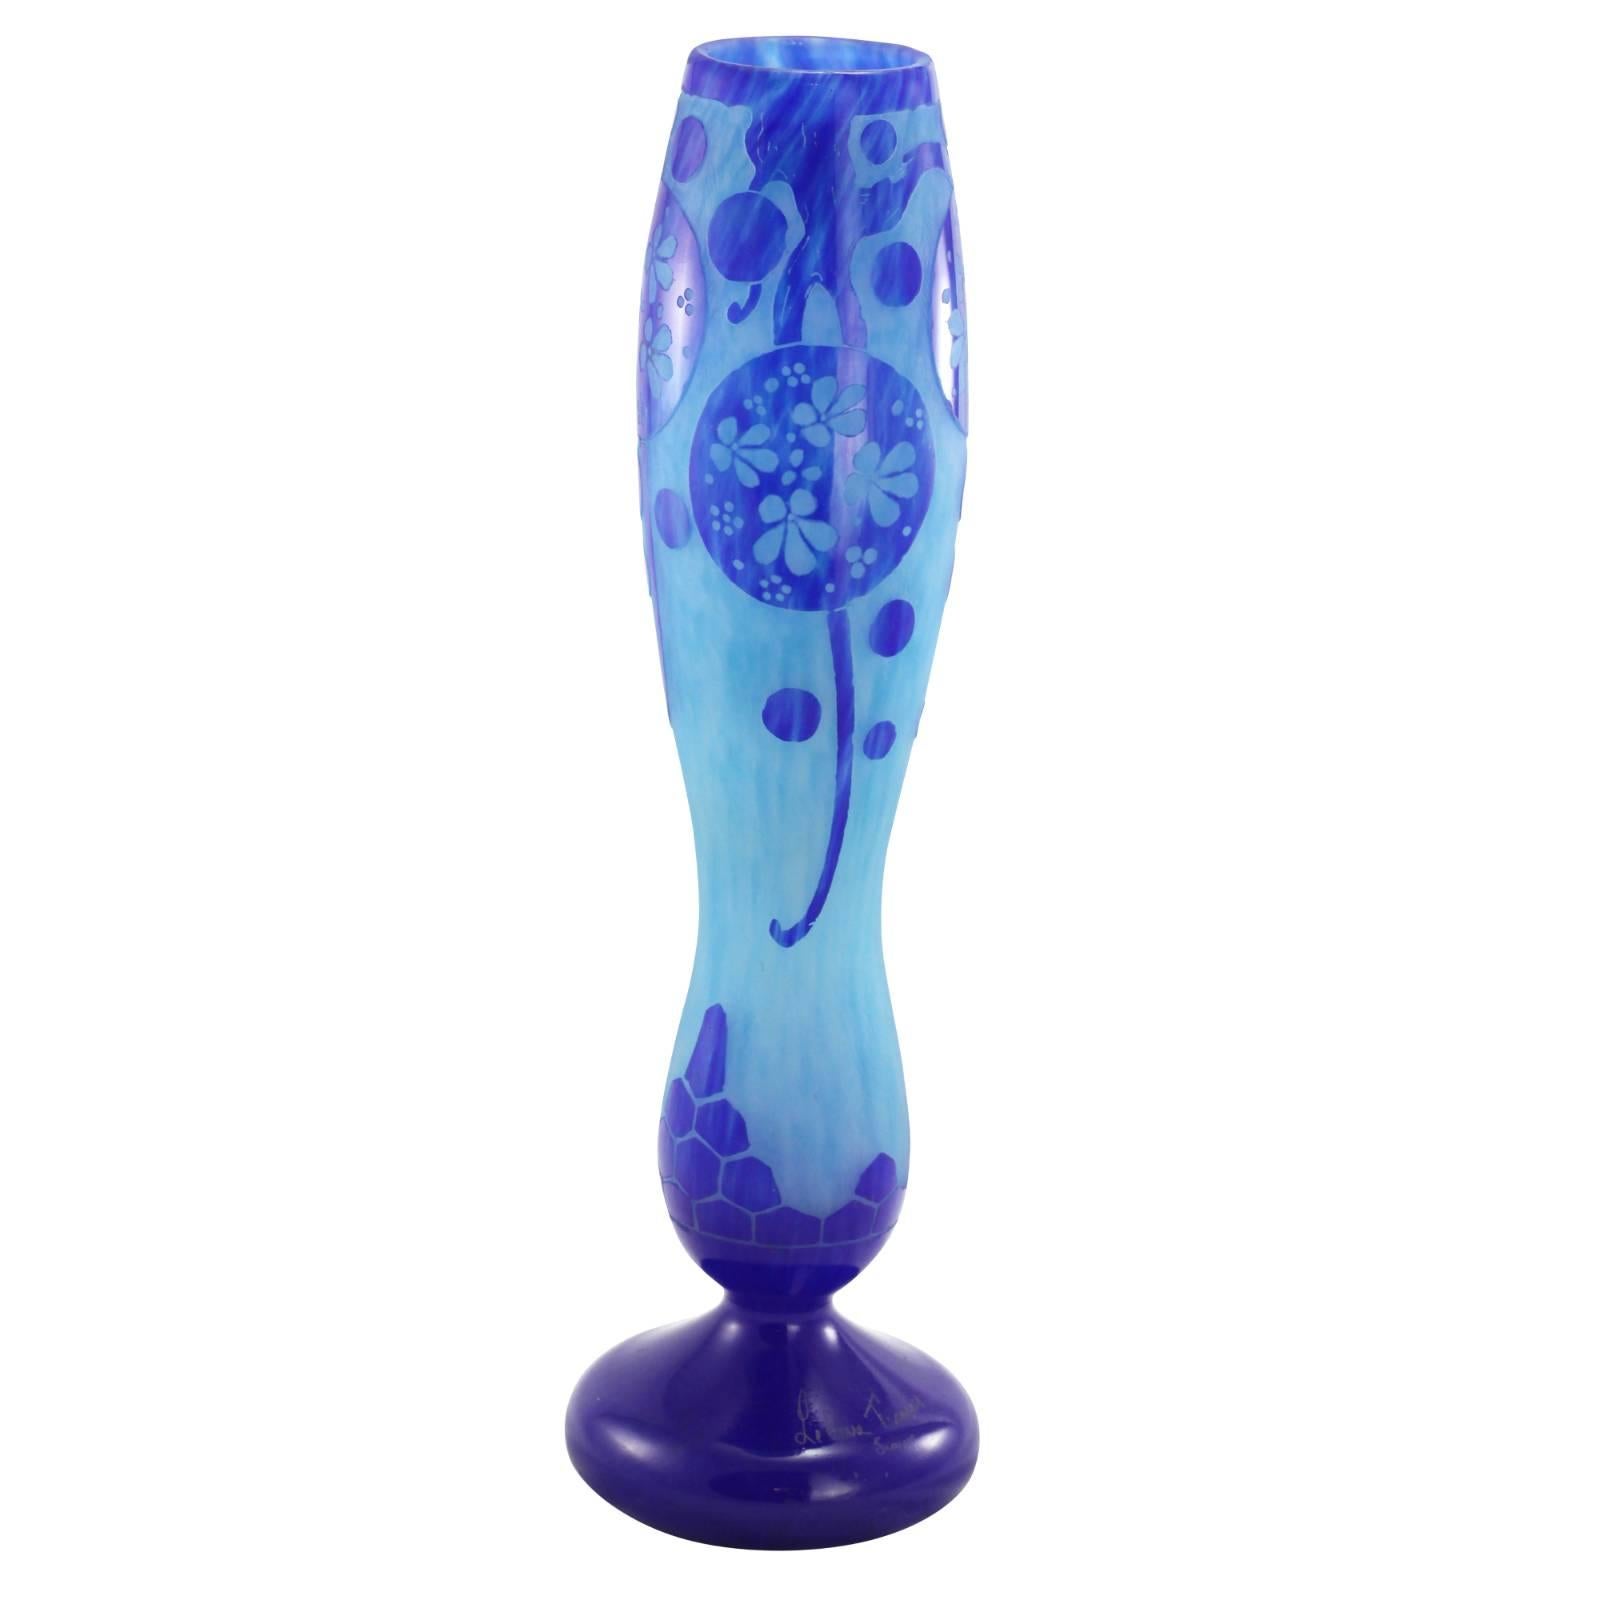 Early 20th century Art Deco French cameo glass vase by Charles Schneider. Apart of the Le Verre Francais range released by Schneider glass in the 1920s, this piece has been completed in the 'Azurette' pattern with contrasting royal and aqua colored